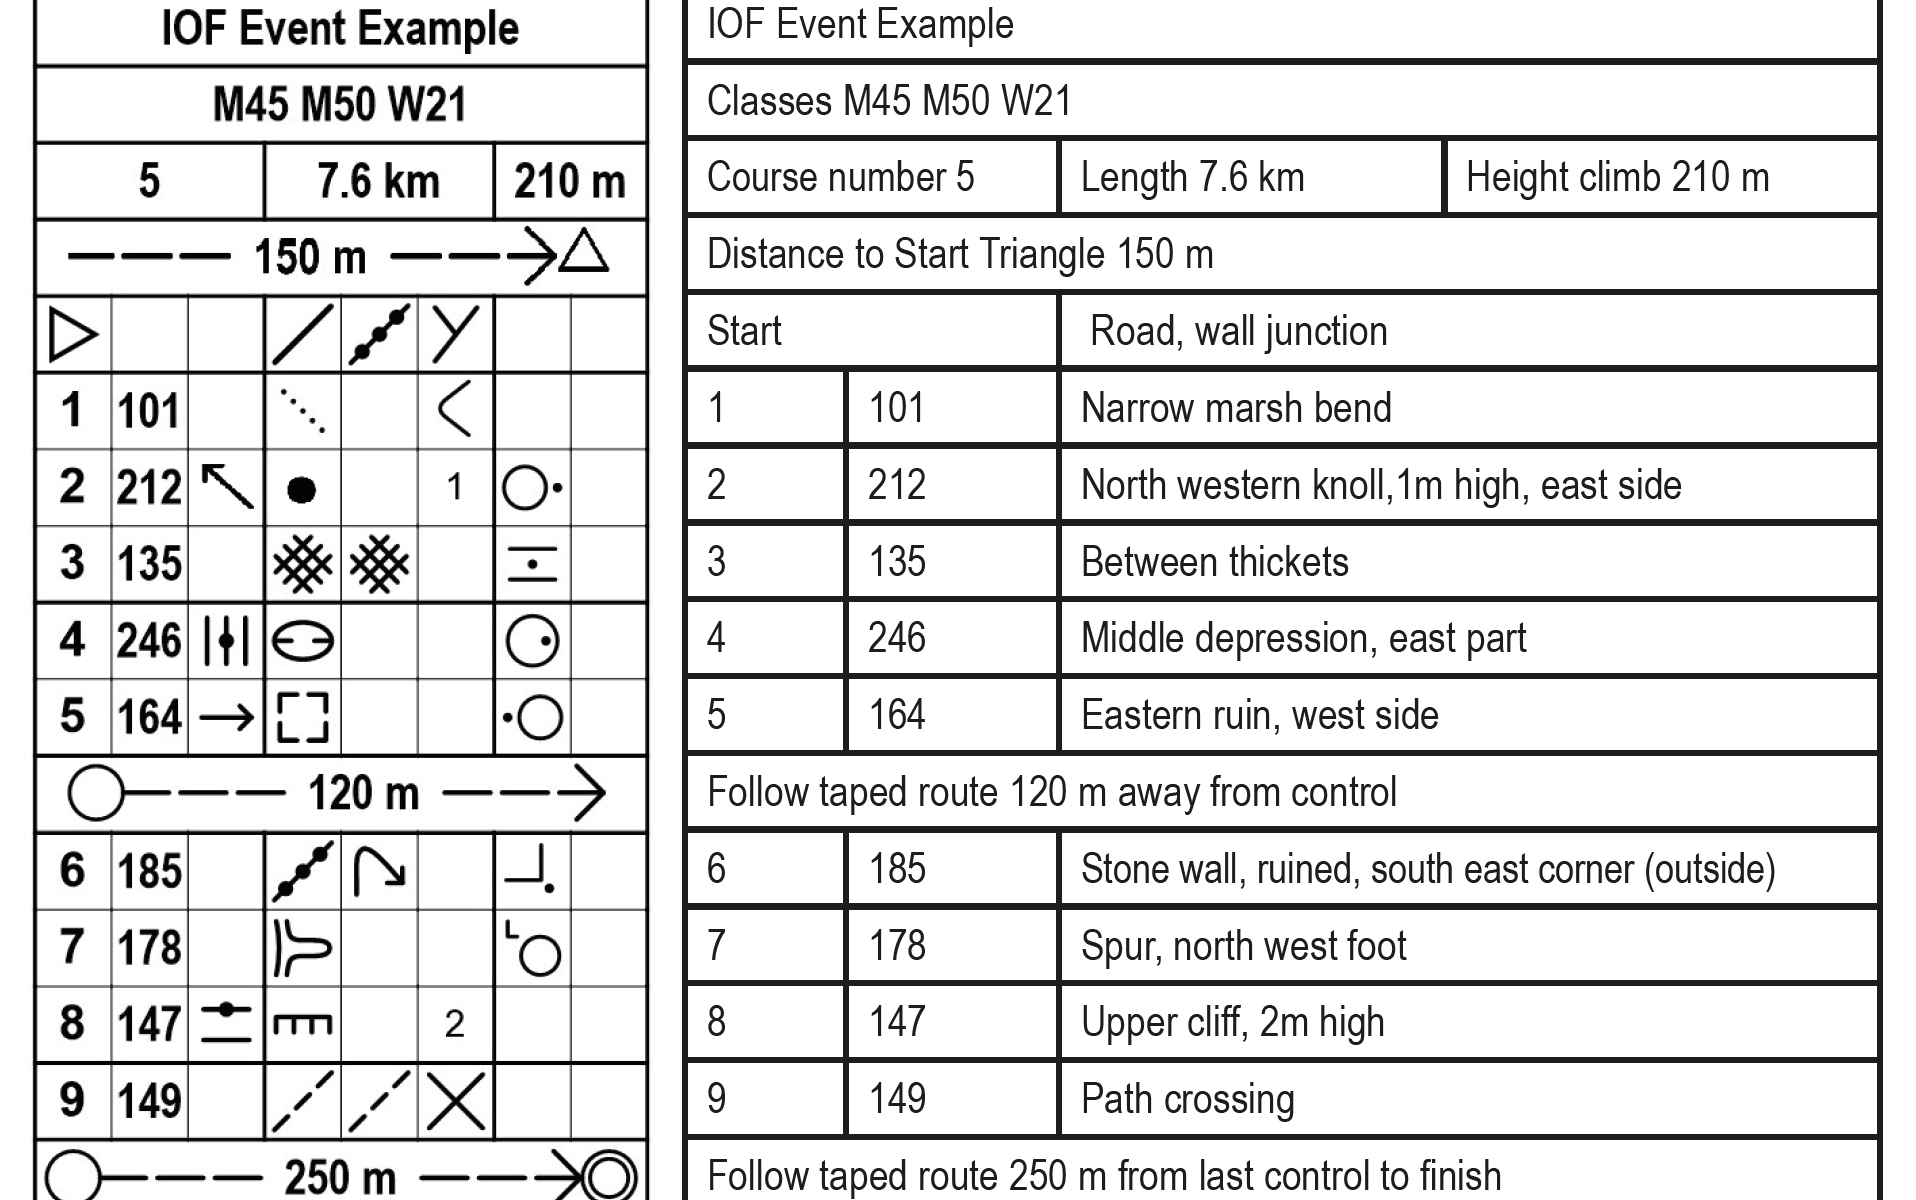 Learn more about Control Descriptions! | Northeast Ohio Orienteering Club